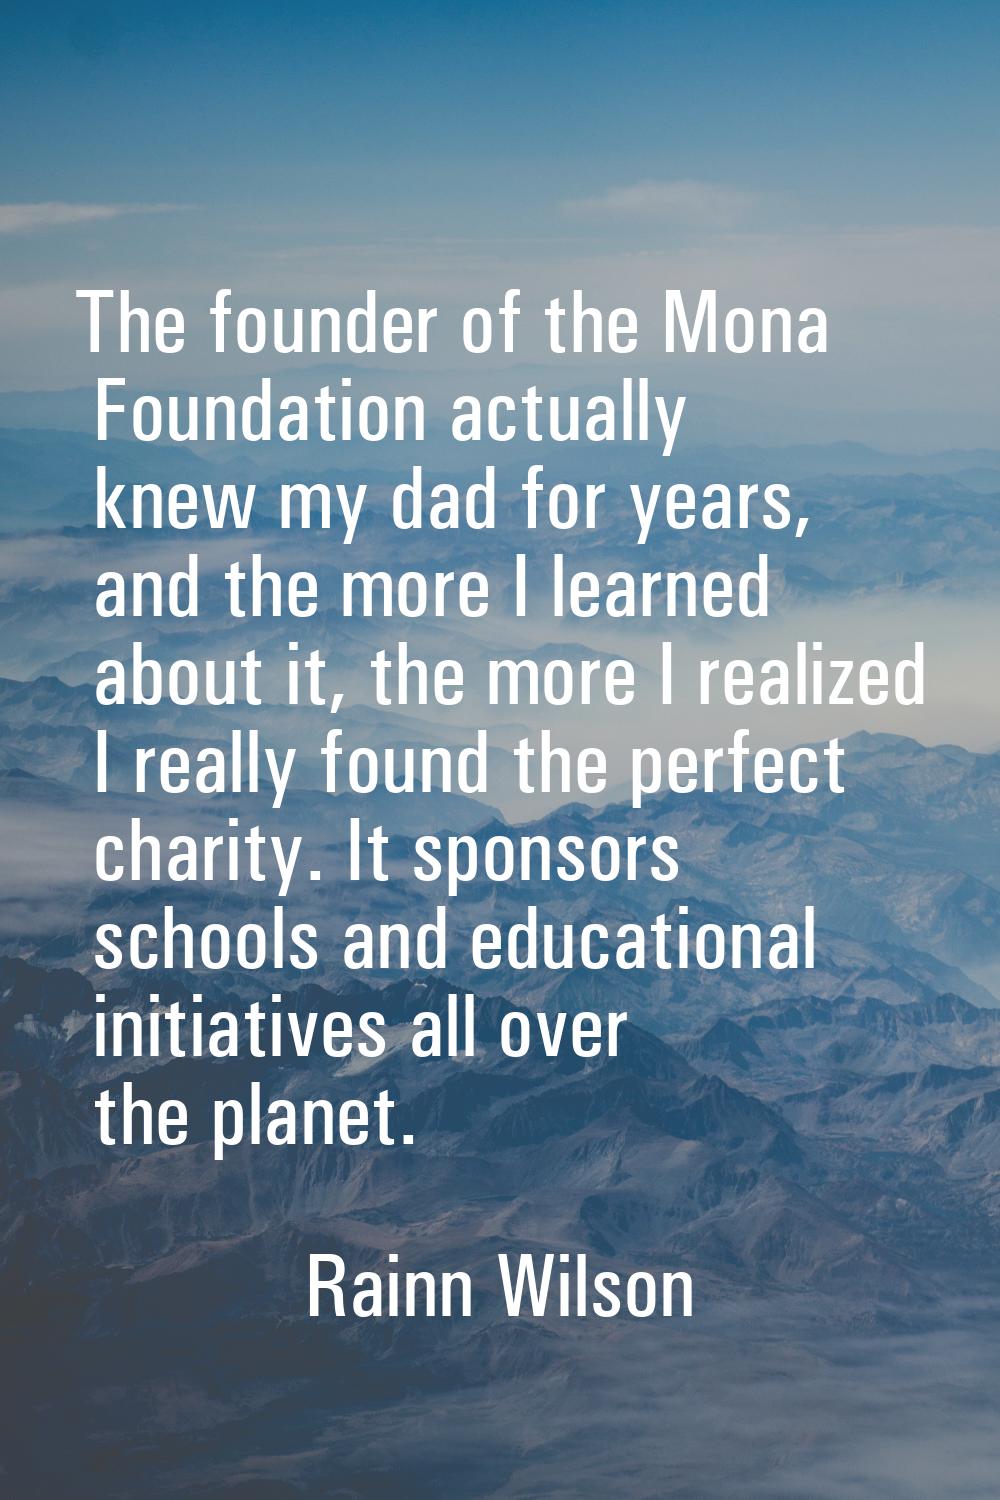 The founder of the Mona Foundation actually knew my dad for years, and the more I learned about it,